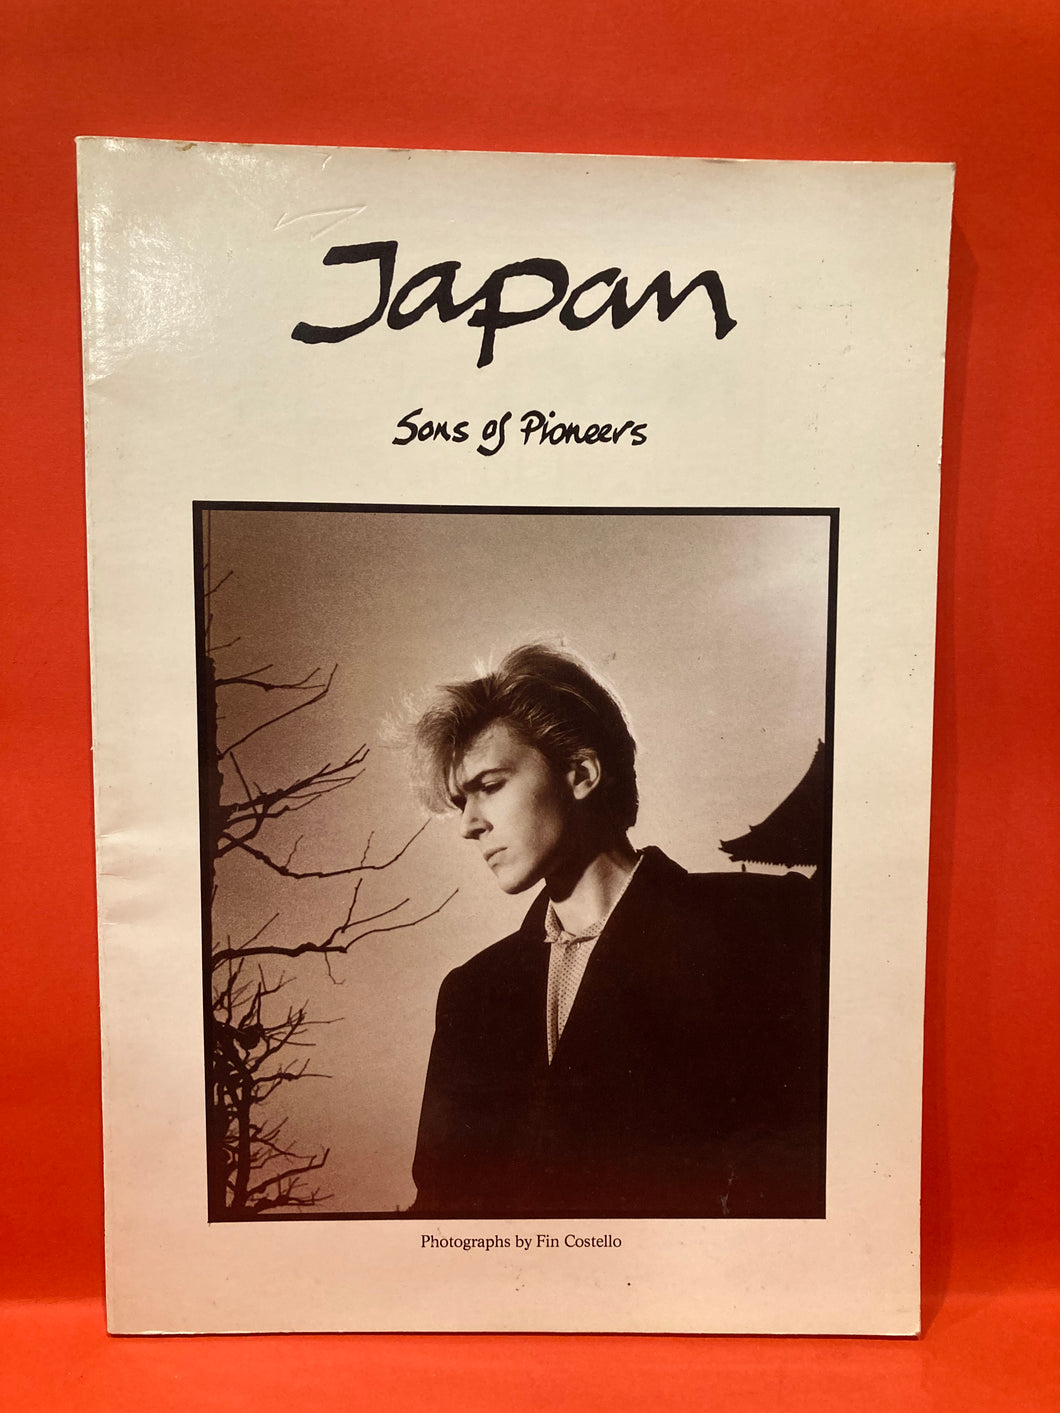 JAPAN - SONS OF PIONEERS   PHOTOGRAPHS BY FINN COSTELLO- Paperback Book -  RARE 1st ed. 1983